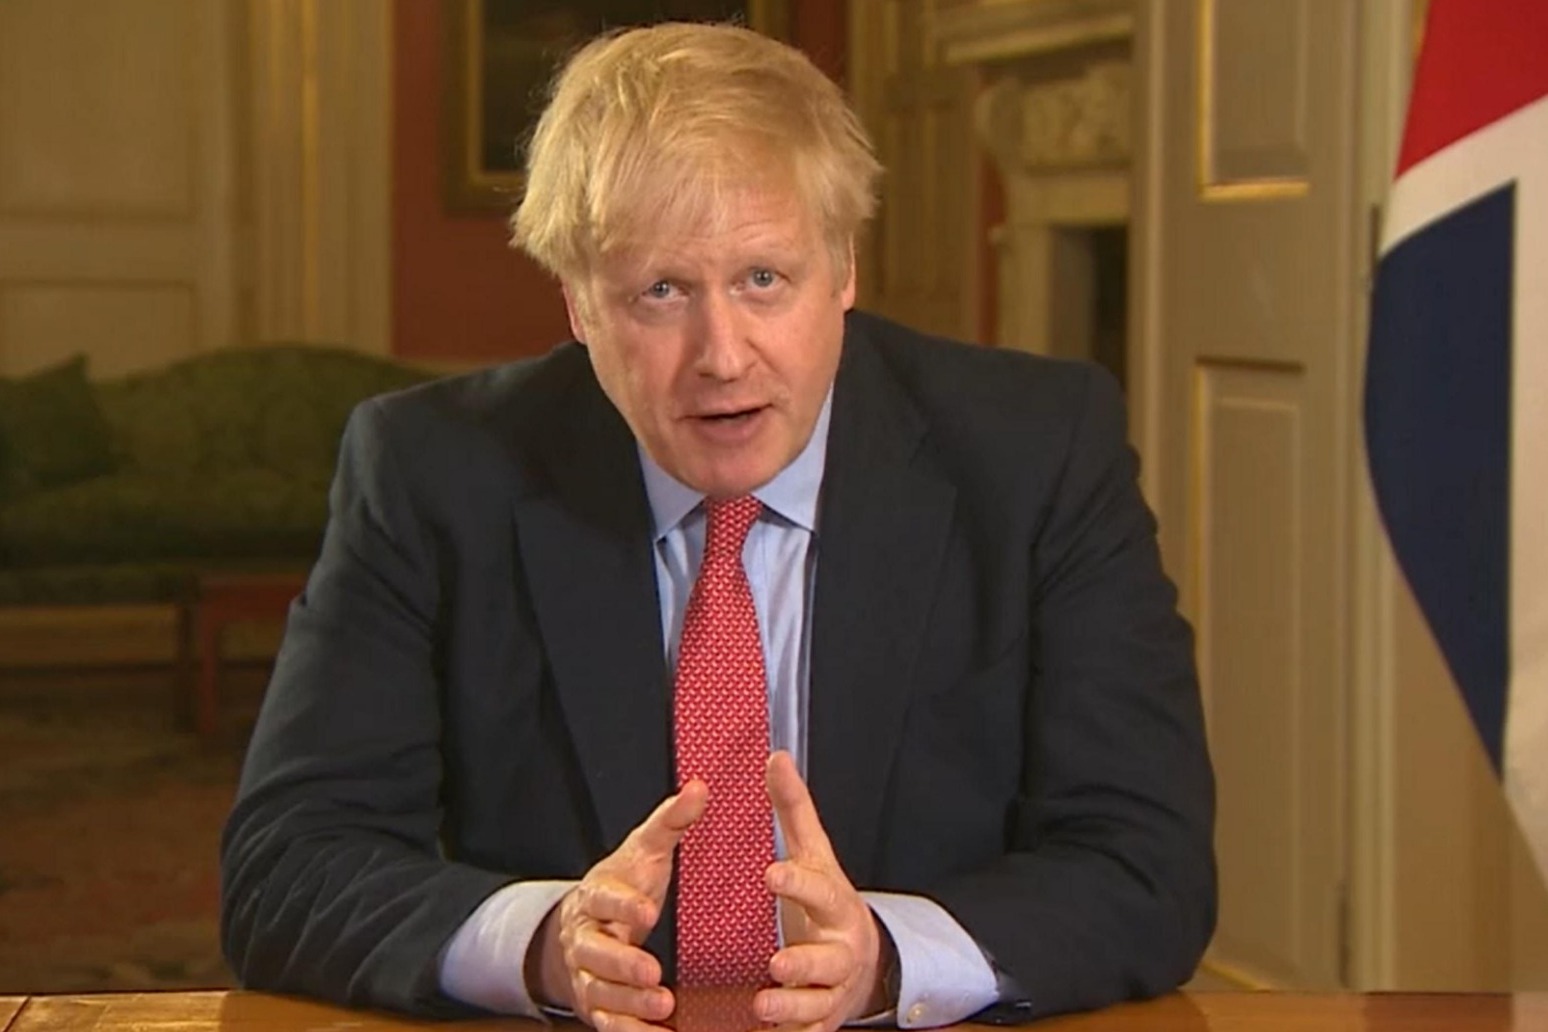 Johnson: You must stay at home - UK in lockdown 